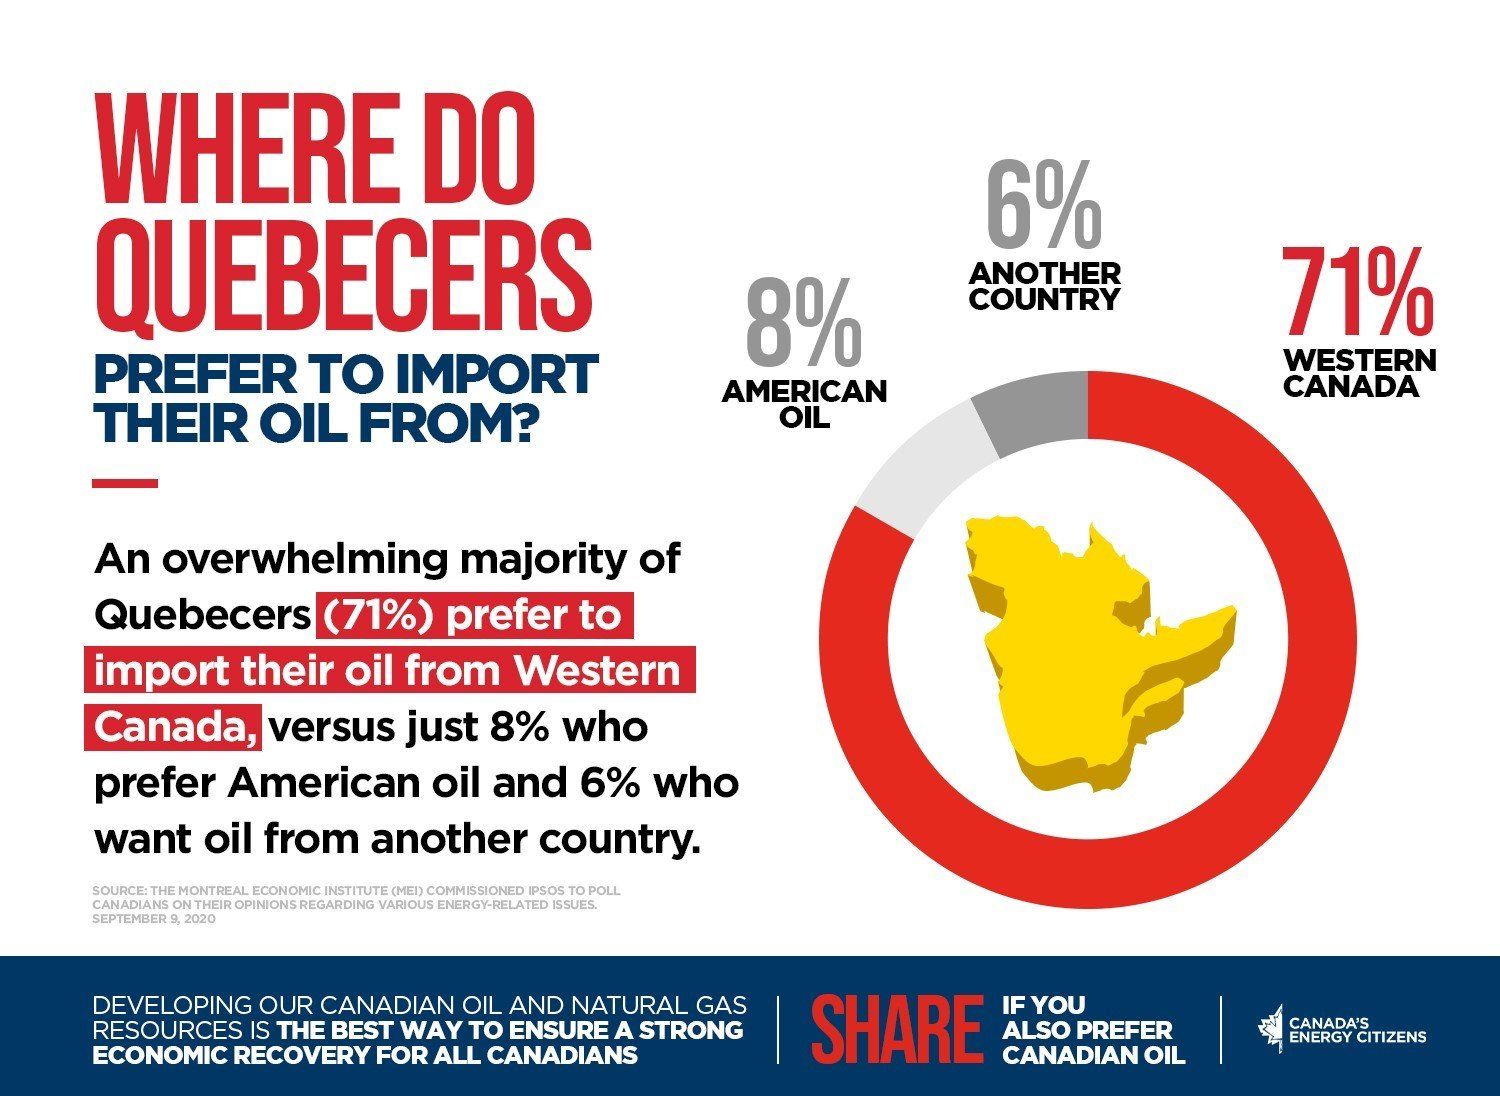 Where Do Quebecers Prefer to Import their Oil from?